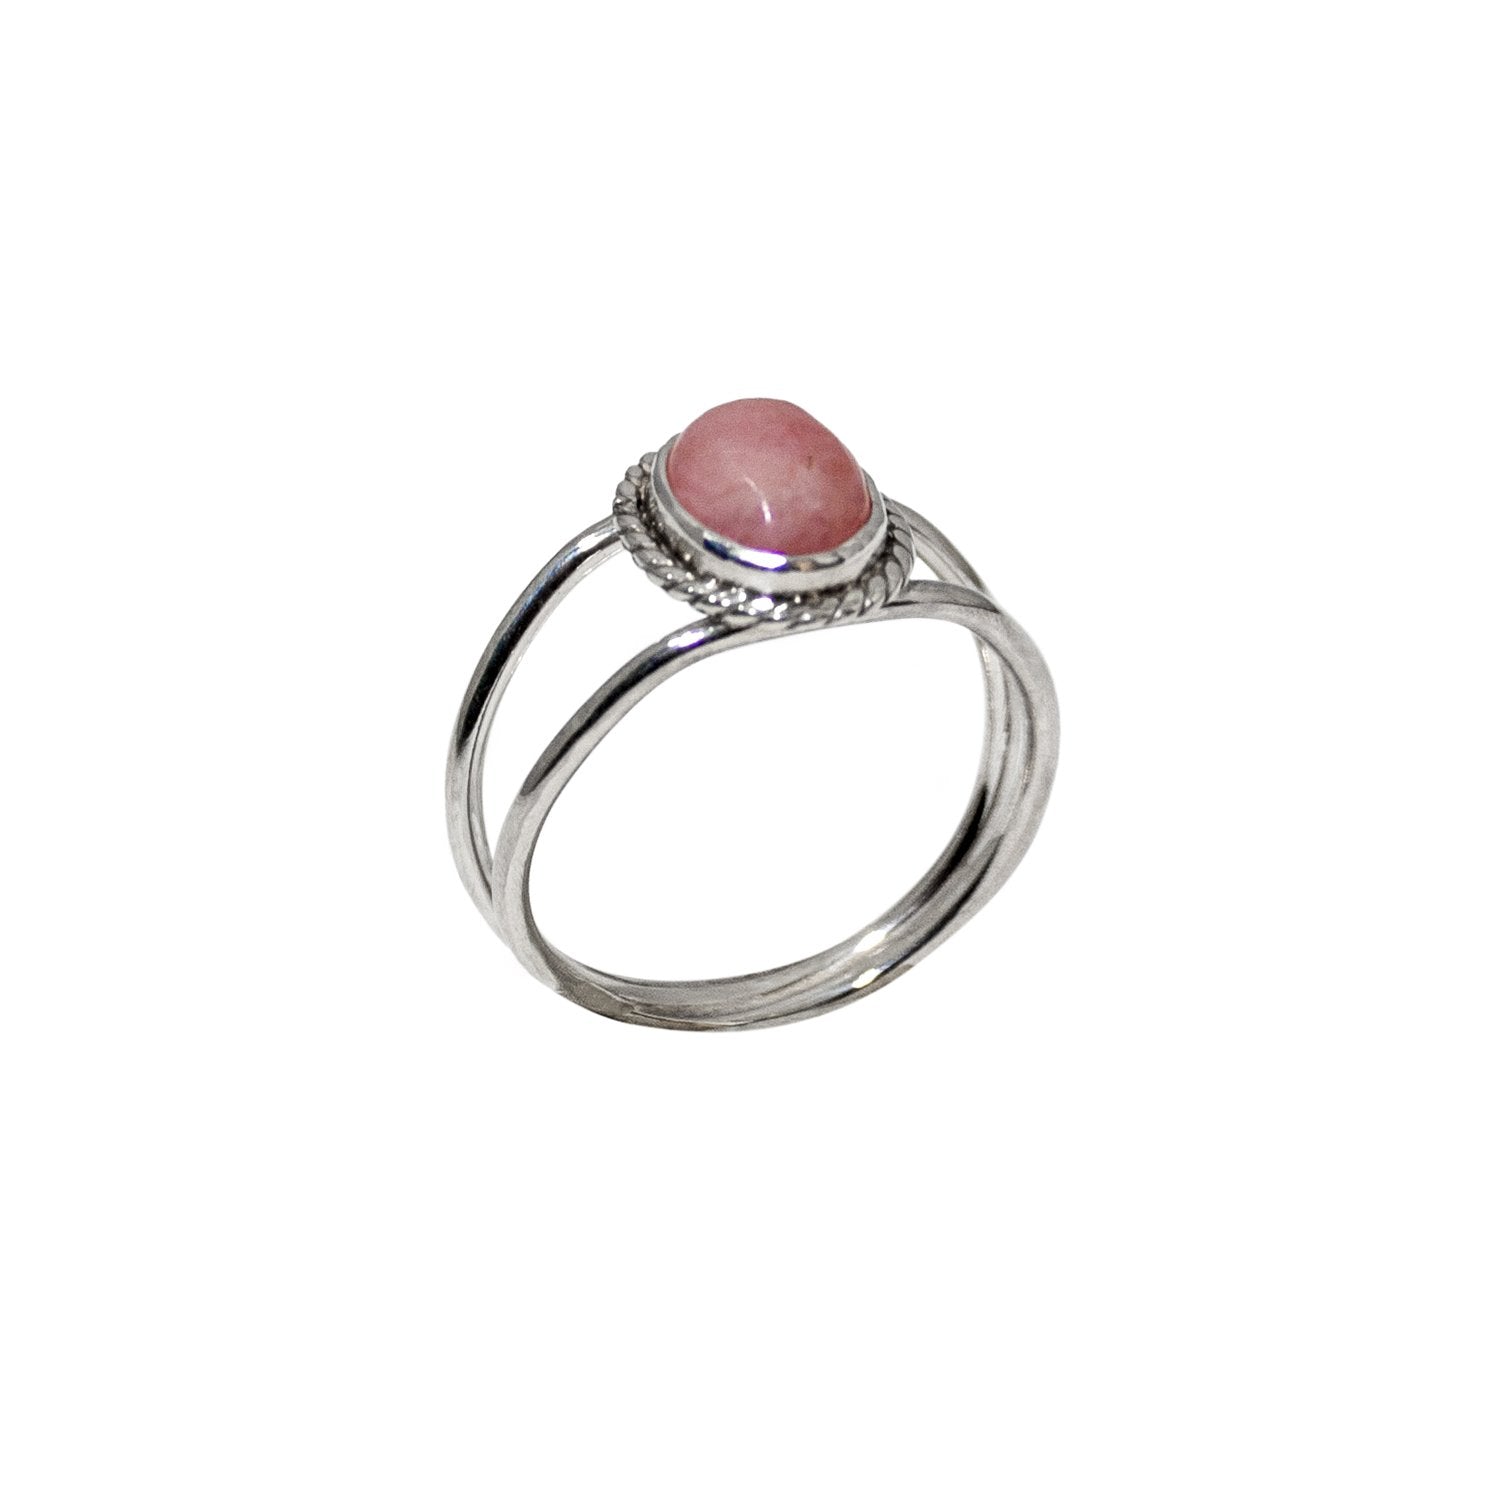 Pink Opal Double Band Sterling Silver Bezel Ring - Emotional Healing Stone - Jewelry & Watches - Bijou Her -  -  - 